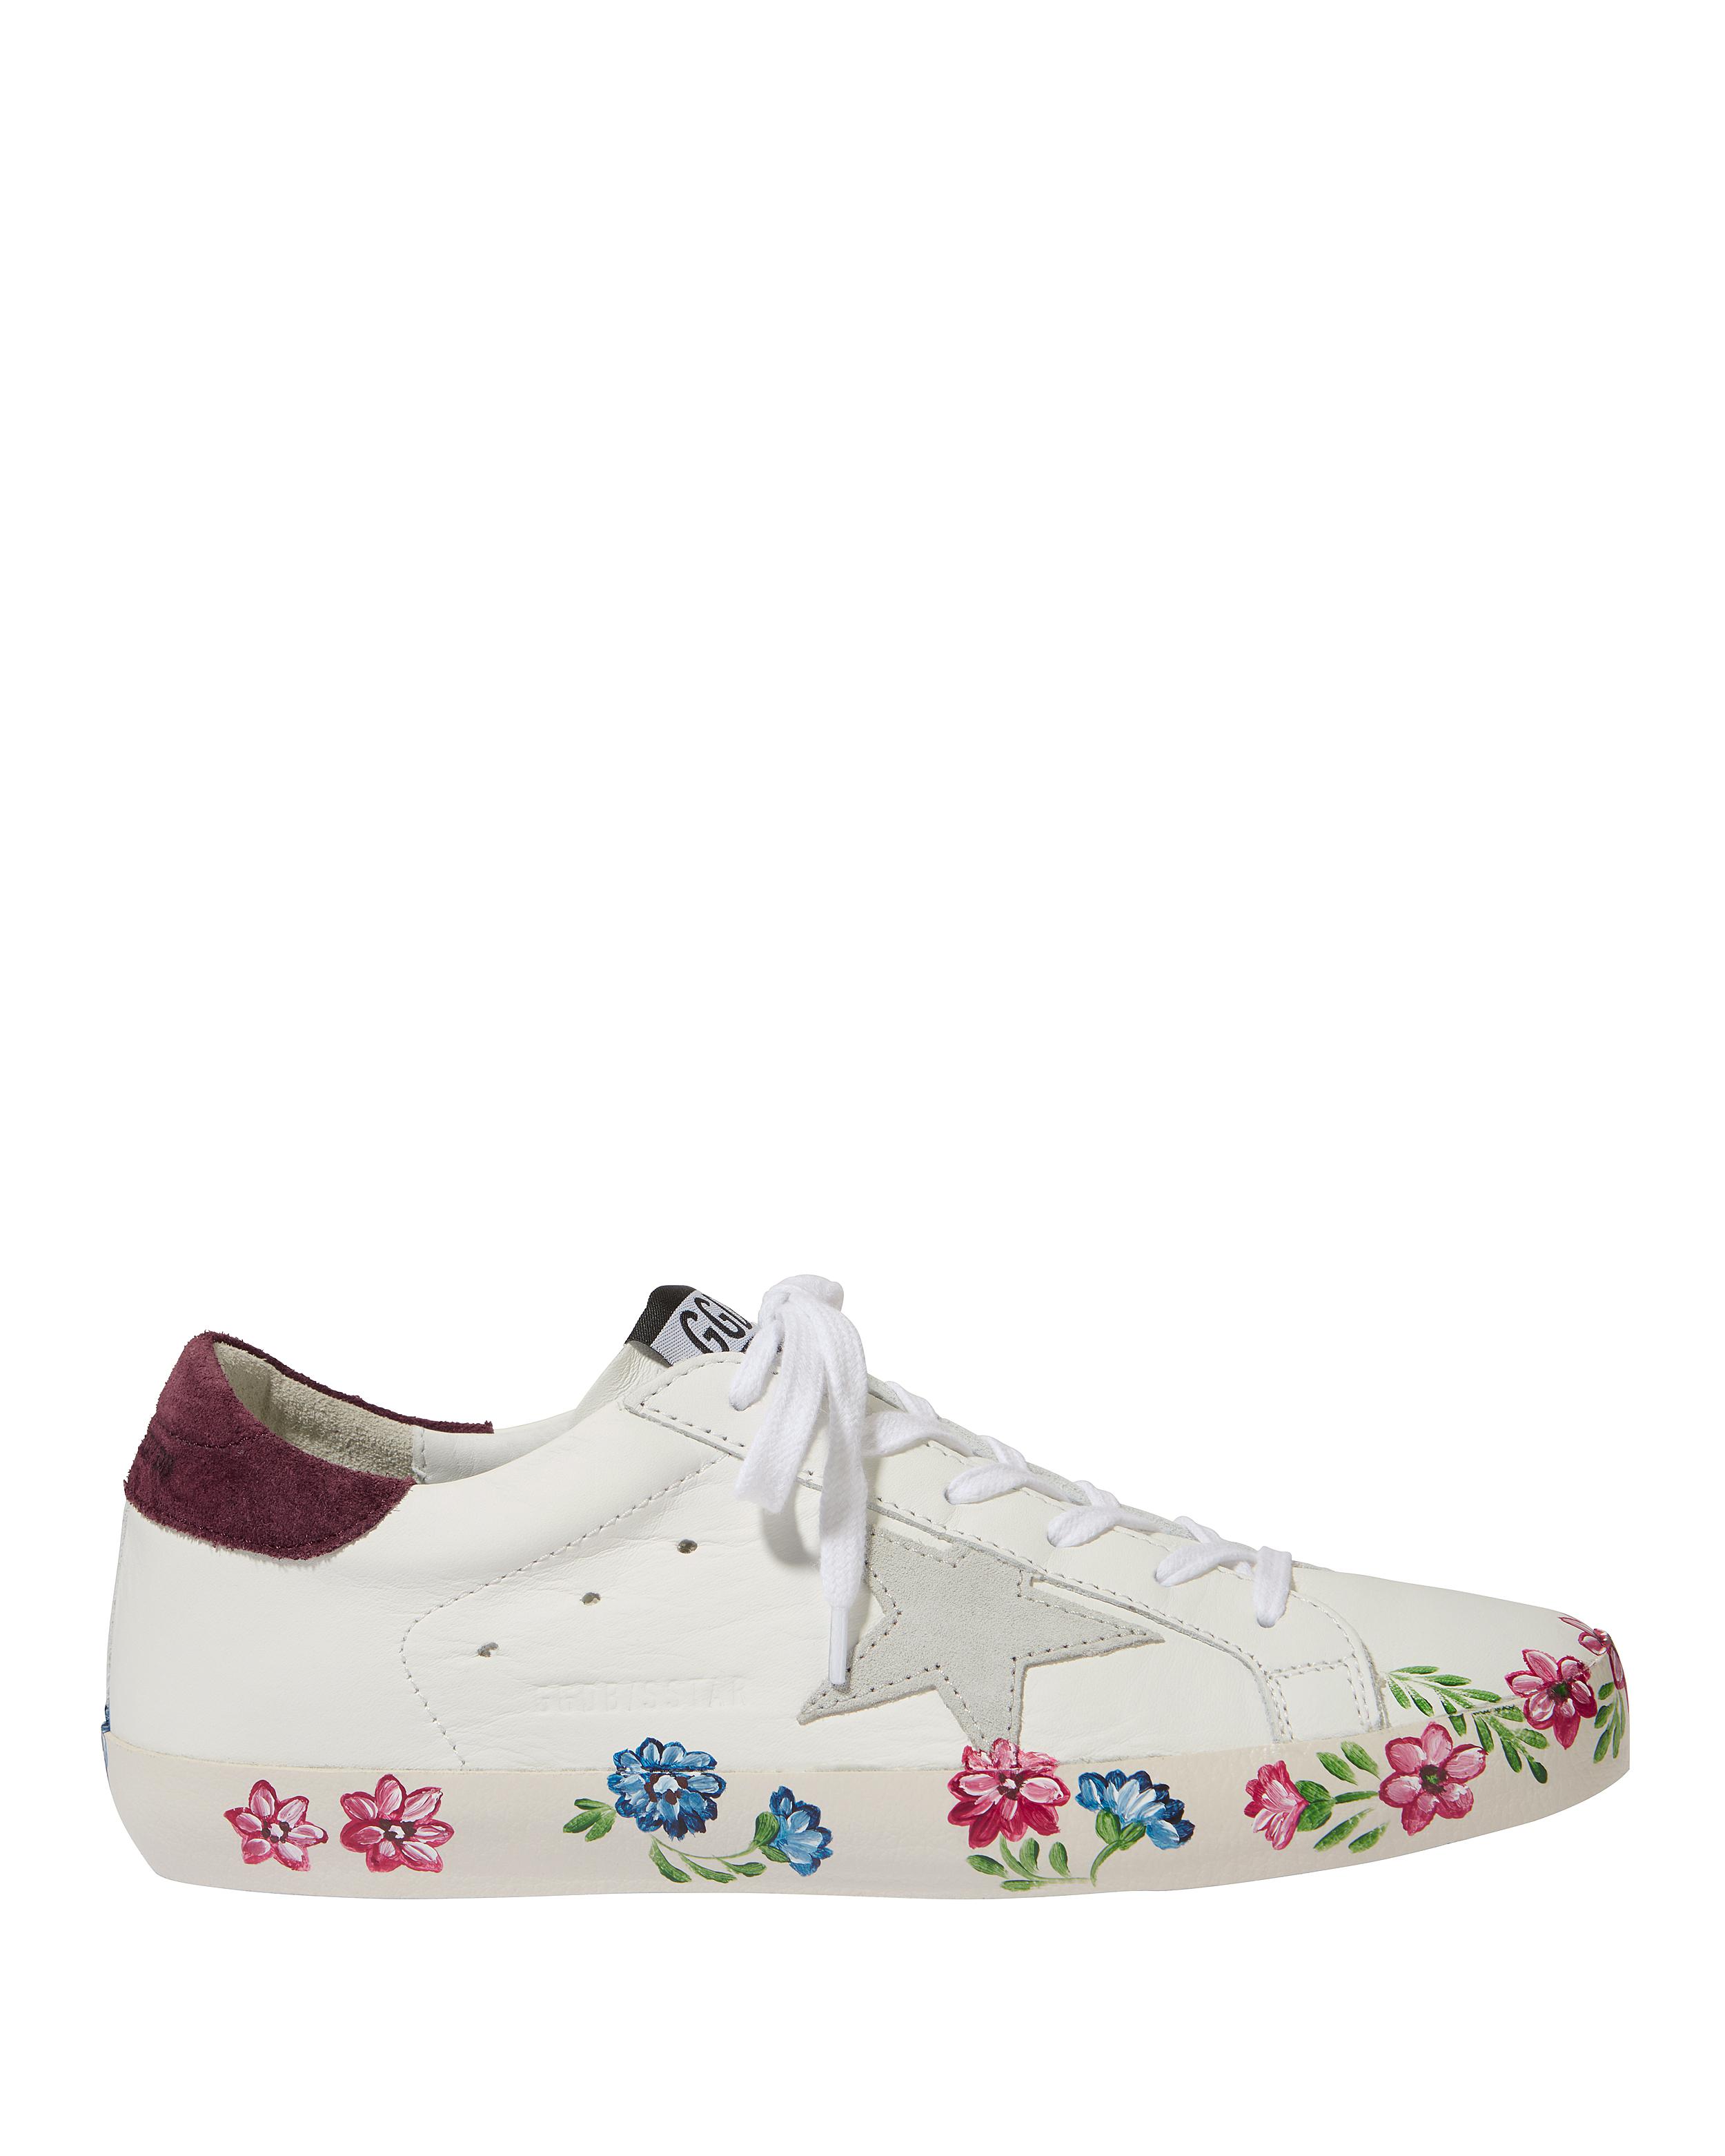 golden goose floral sneakers cheap online